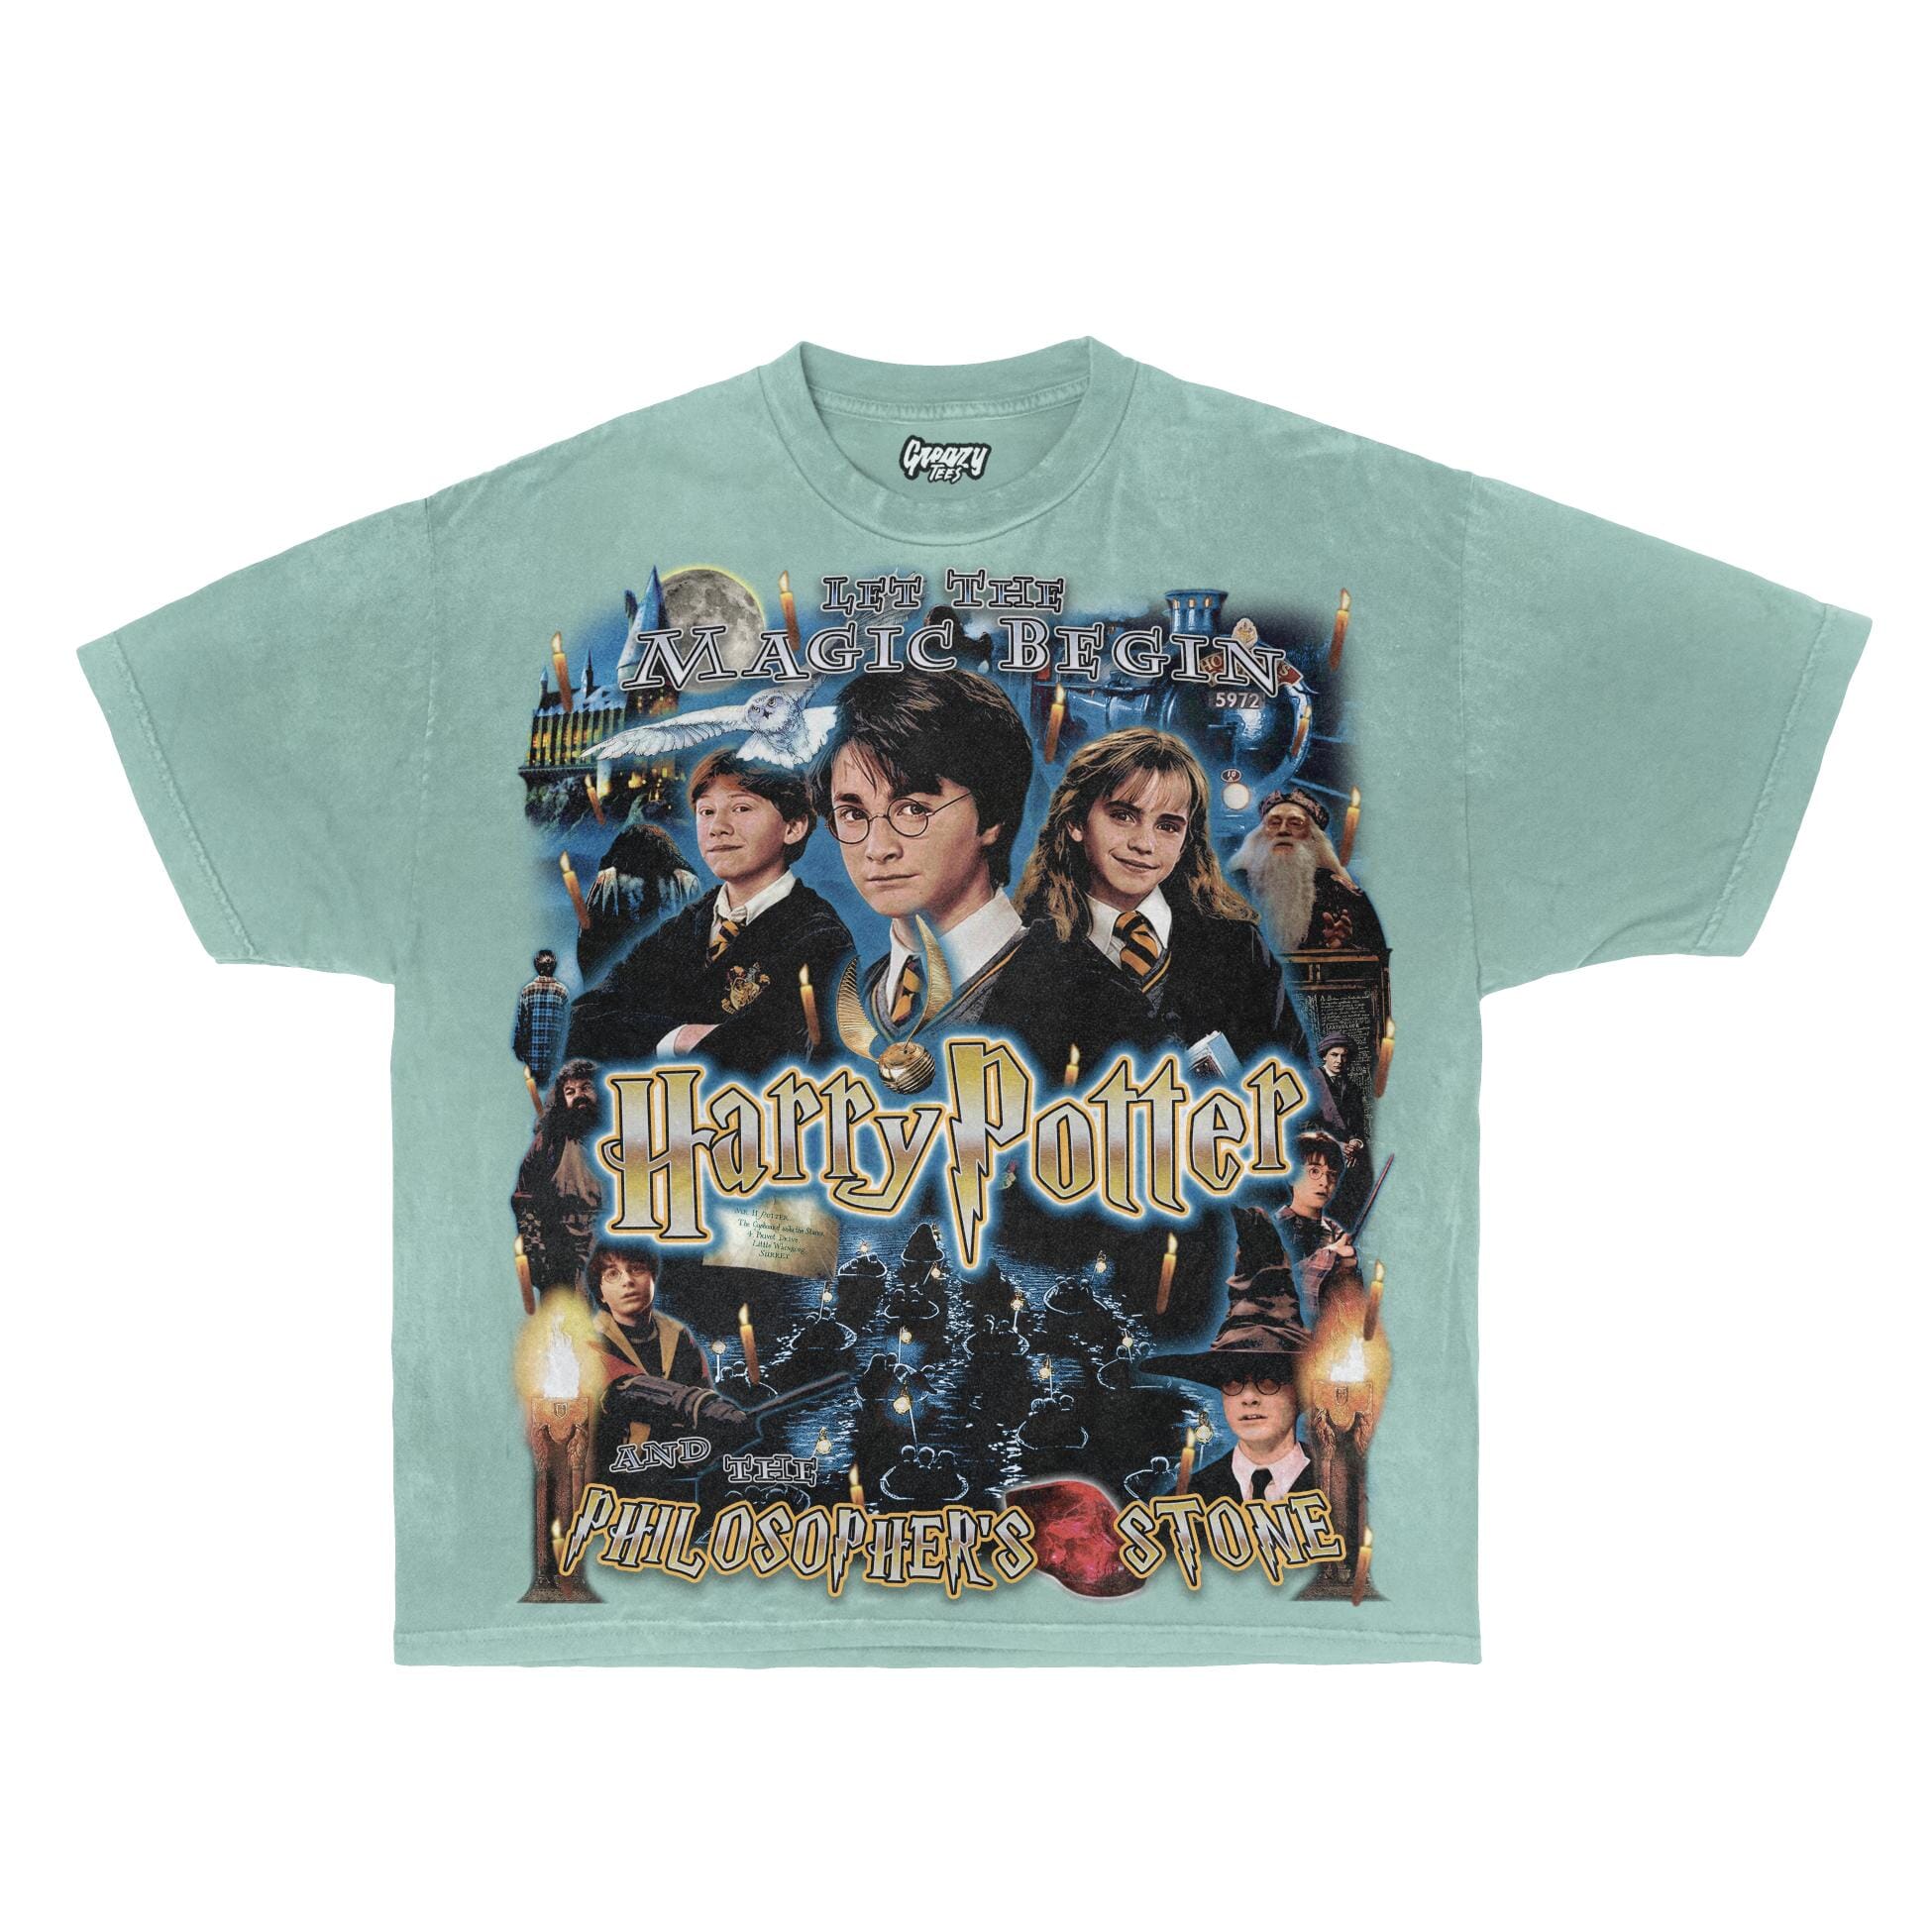 Harry Potter & the Philosopher's Stone Tee Tee Greazy Tees XS Mint Green Oversized